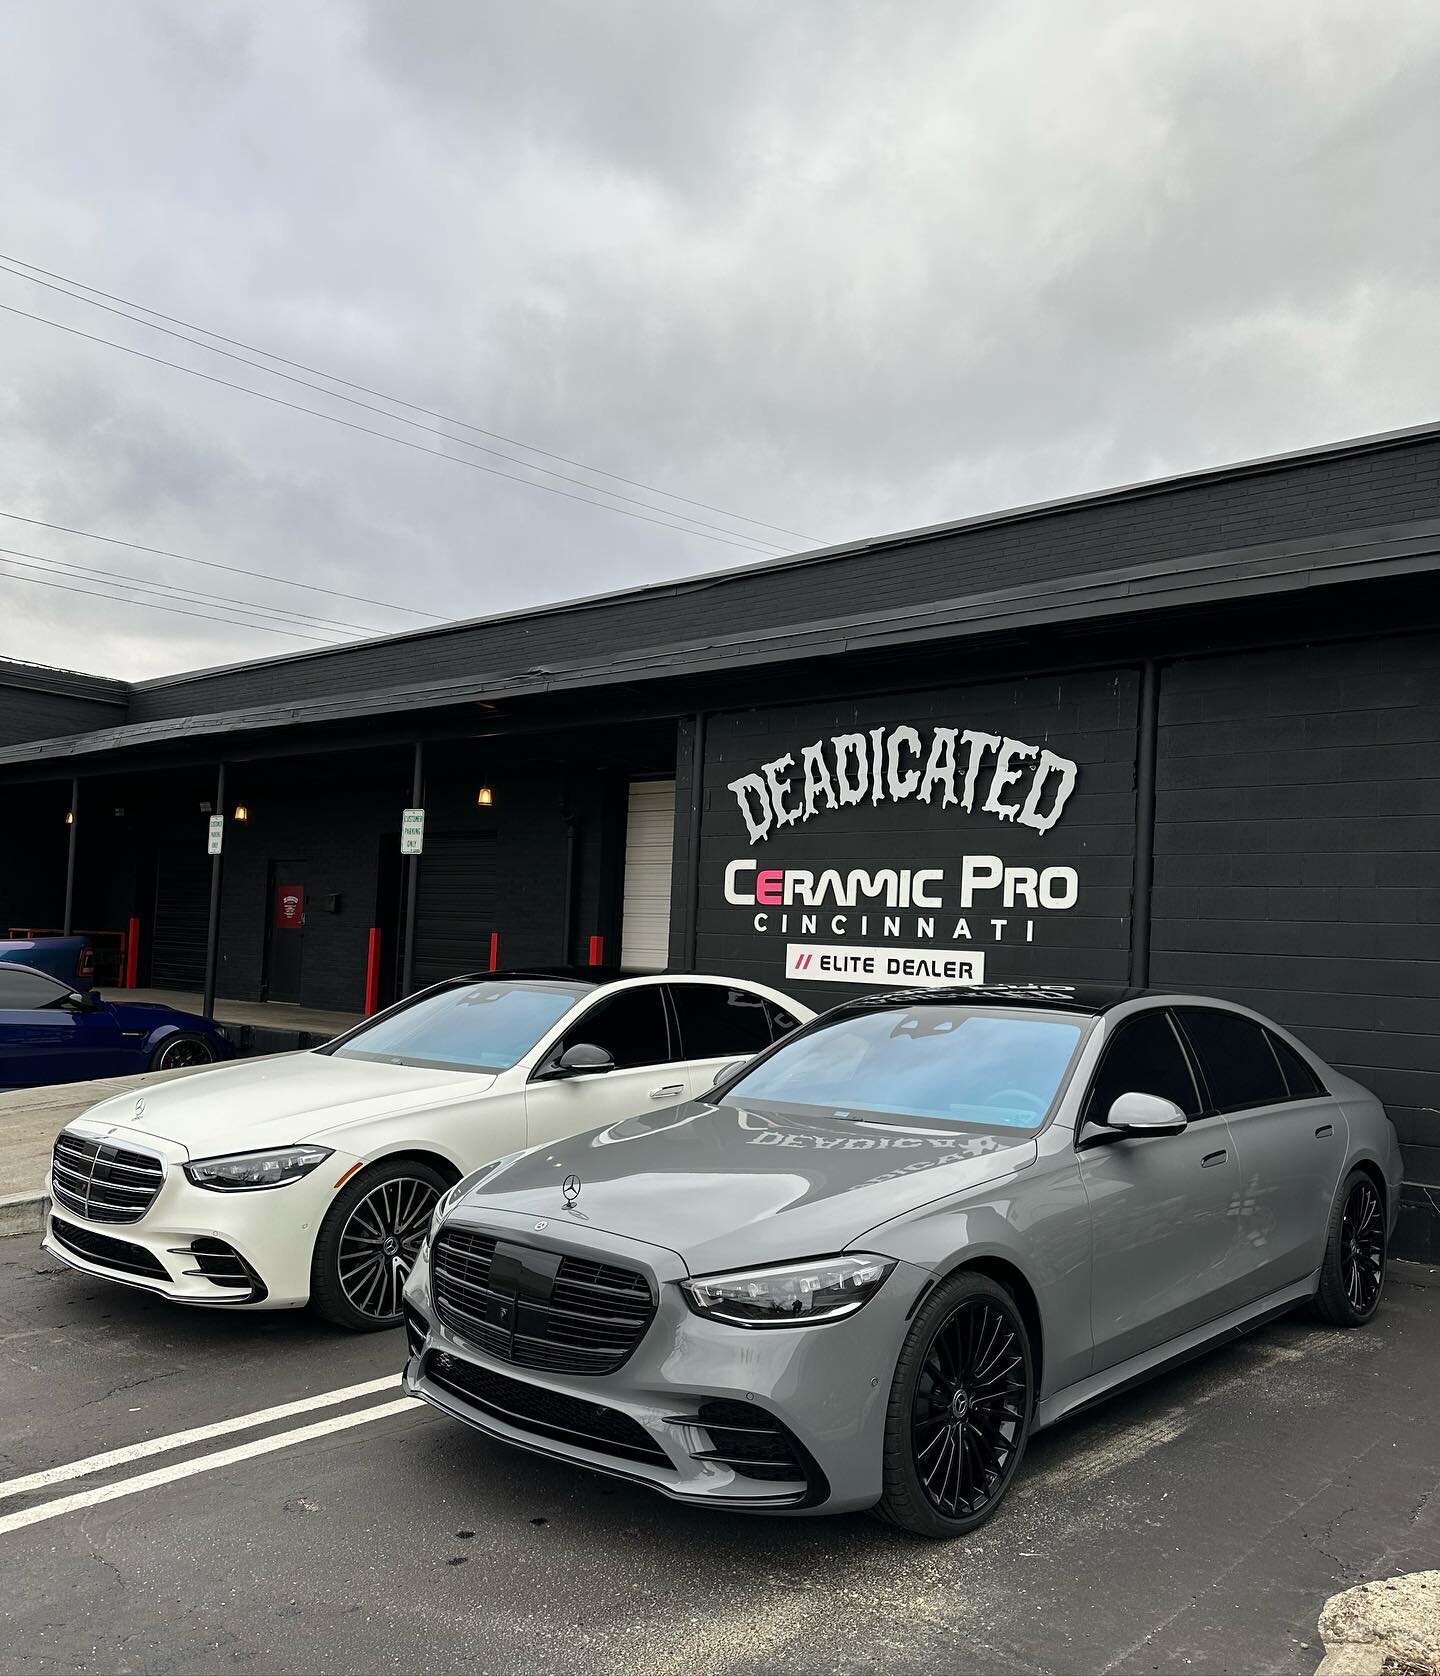 A pair of s580&rsquo;s from @mbftmitchell 
In for a set of different services
▪️Full Front PPF
▪️Chrome Delete 
▪️Full ceramic window film 
▪️Ceramic Pro Coating 
▪️Powder Coated Wheels 

#welcometotheclub #deadicatedautoclub #mercedesbenz #s580 #scl